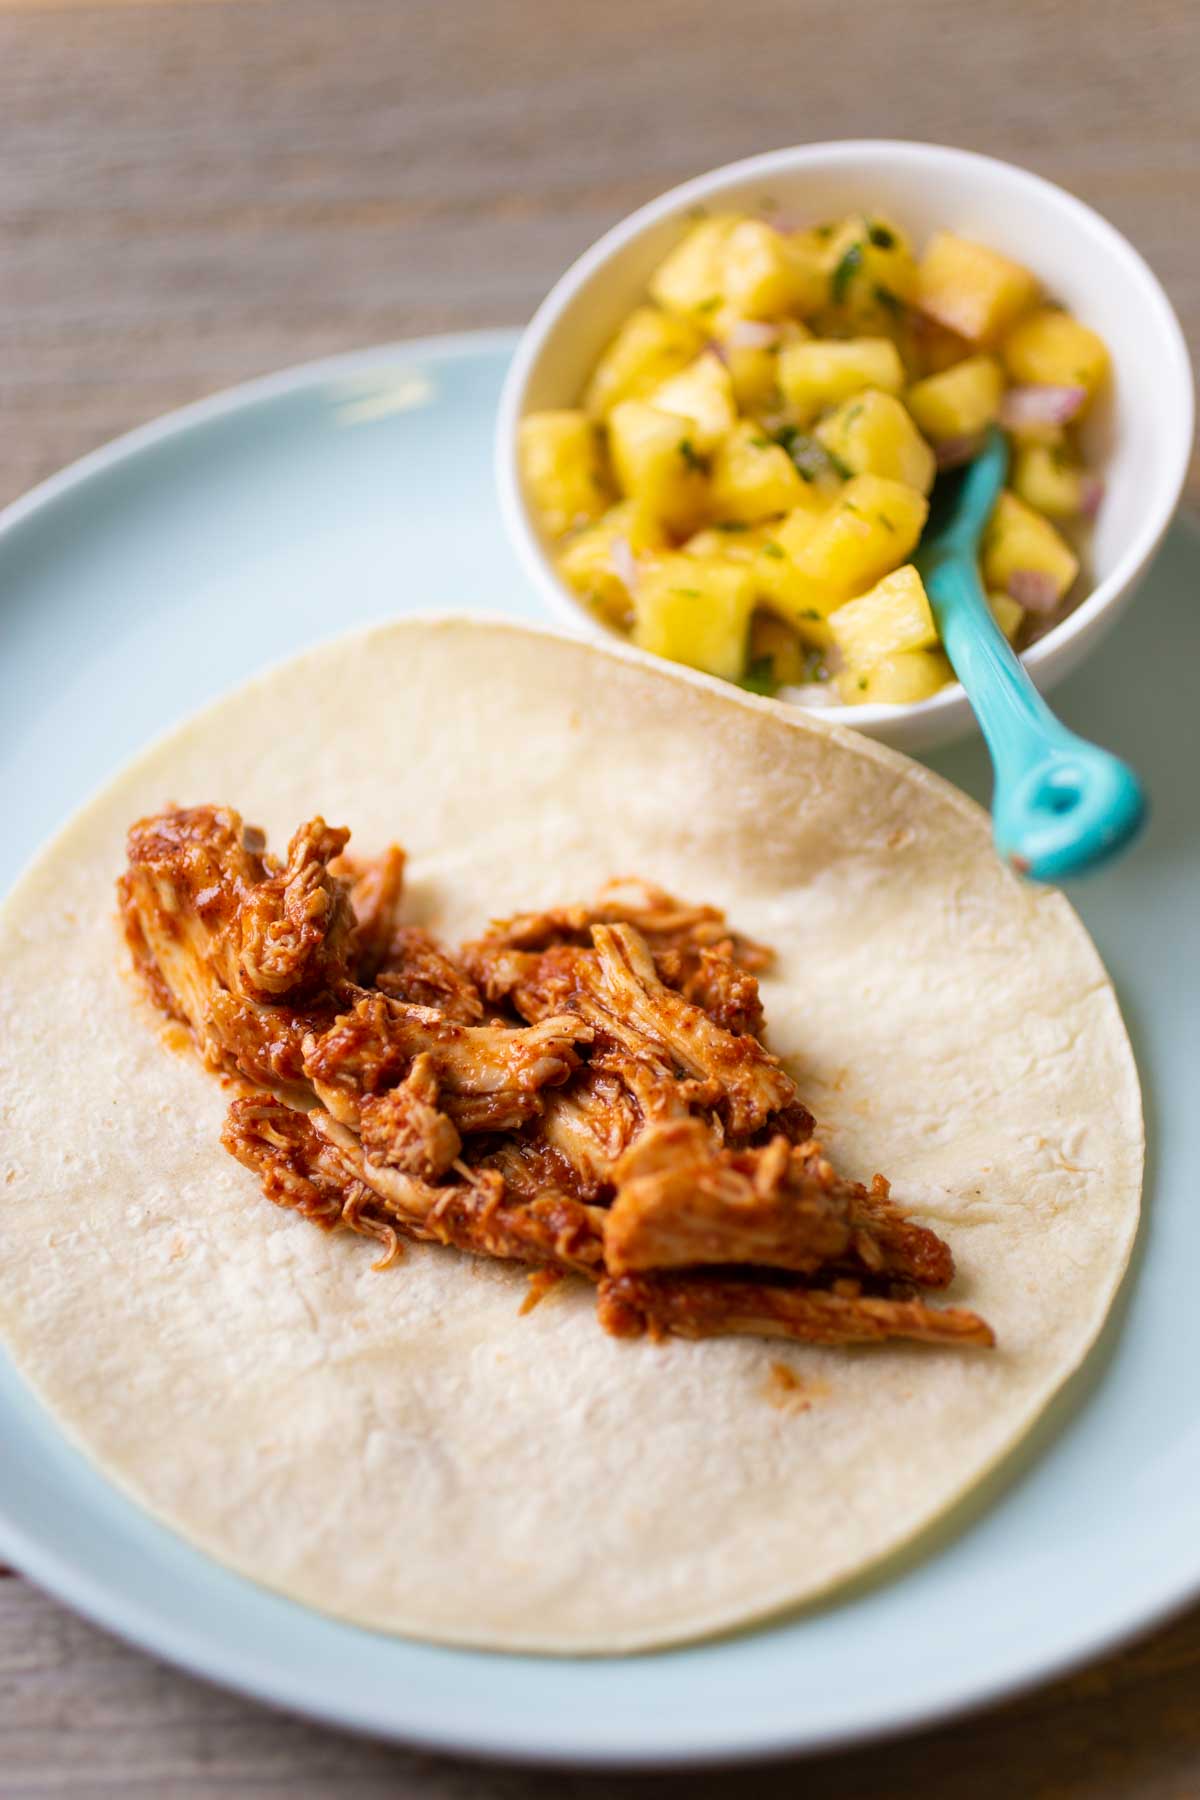 The shredded chicken is on a tortilla shell.